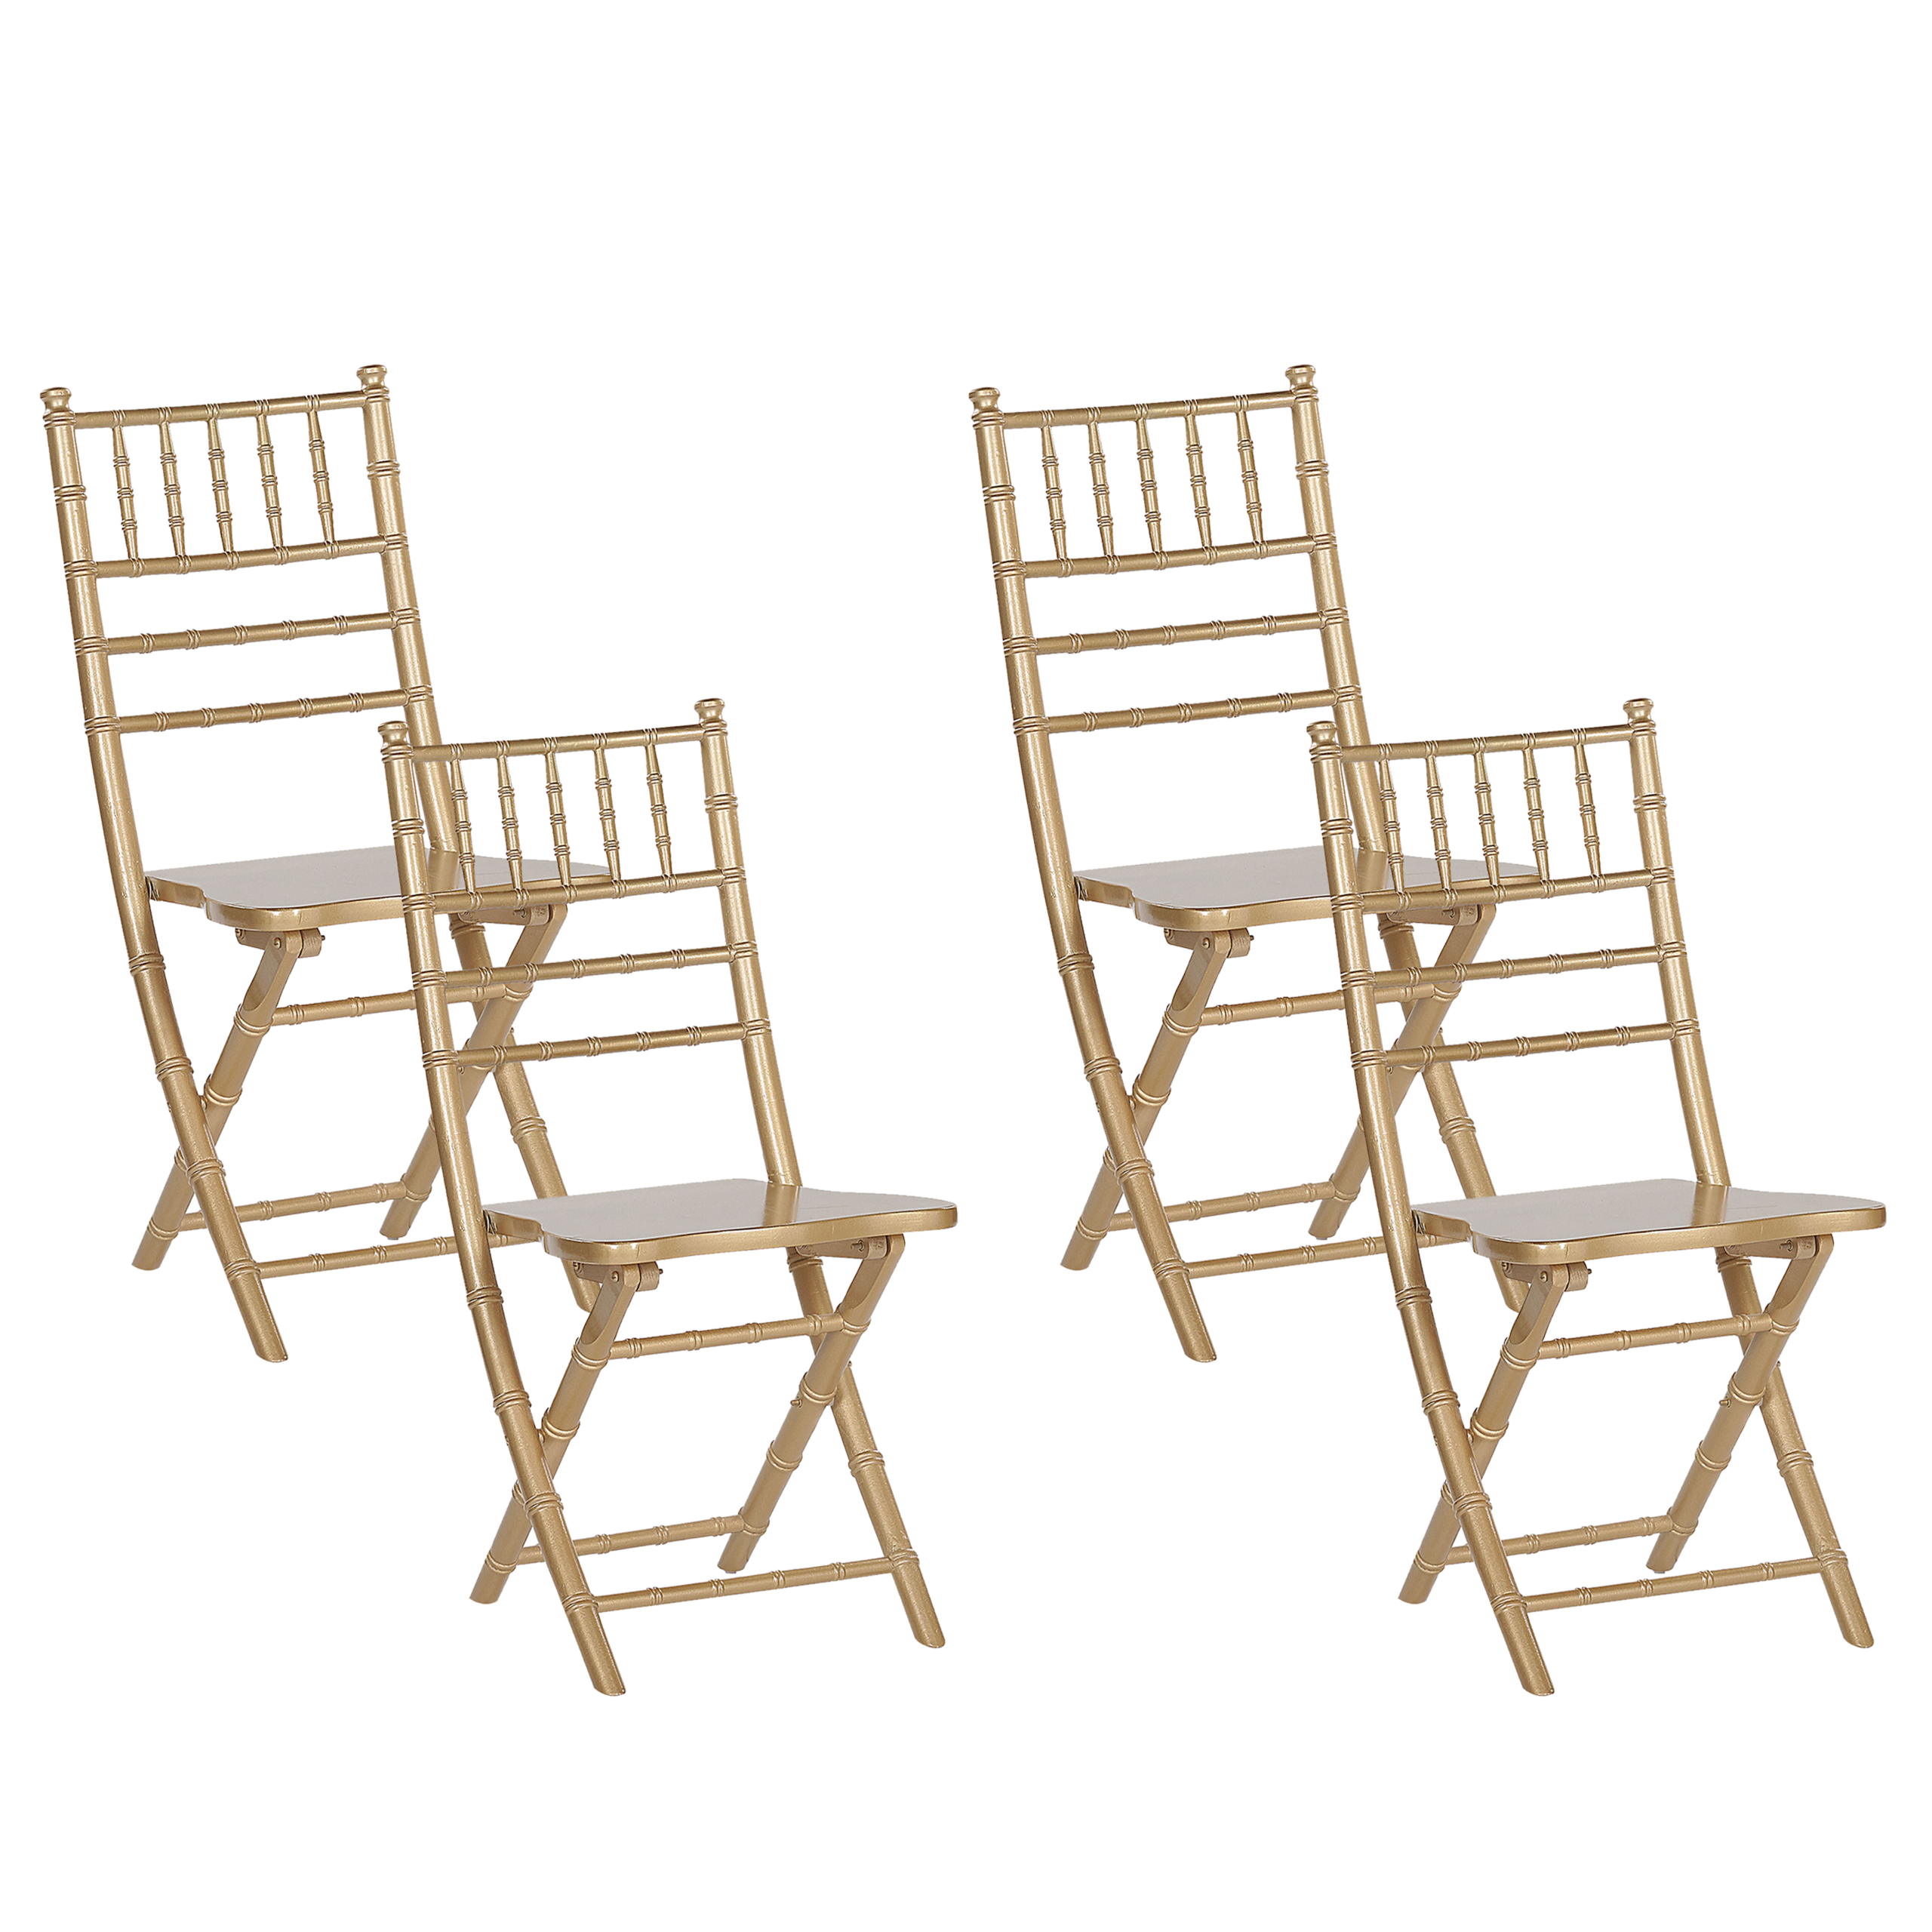 Beliani Set of 4 Folding Chairs Gold Beechwood Dining Room Chairs Contemporary Style